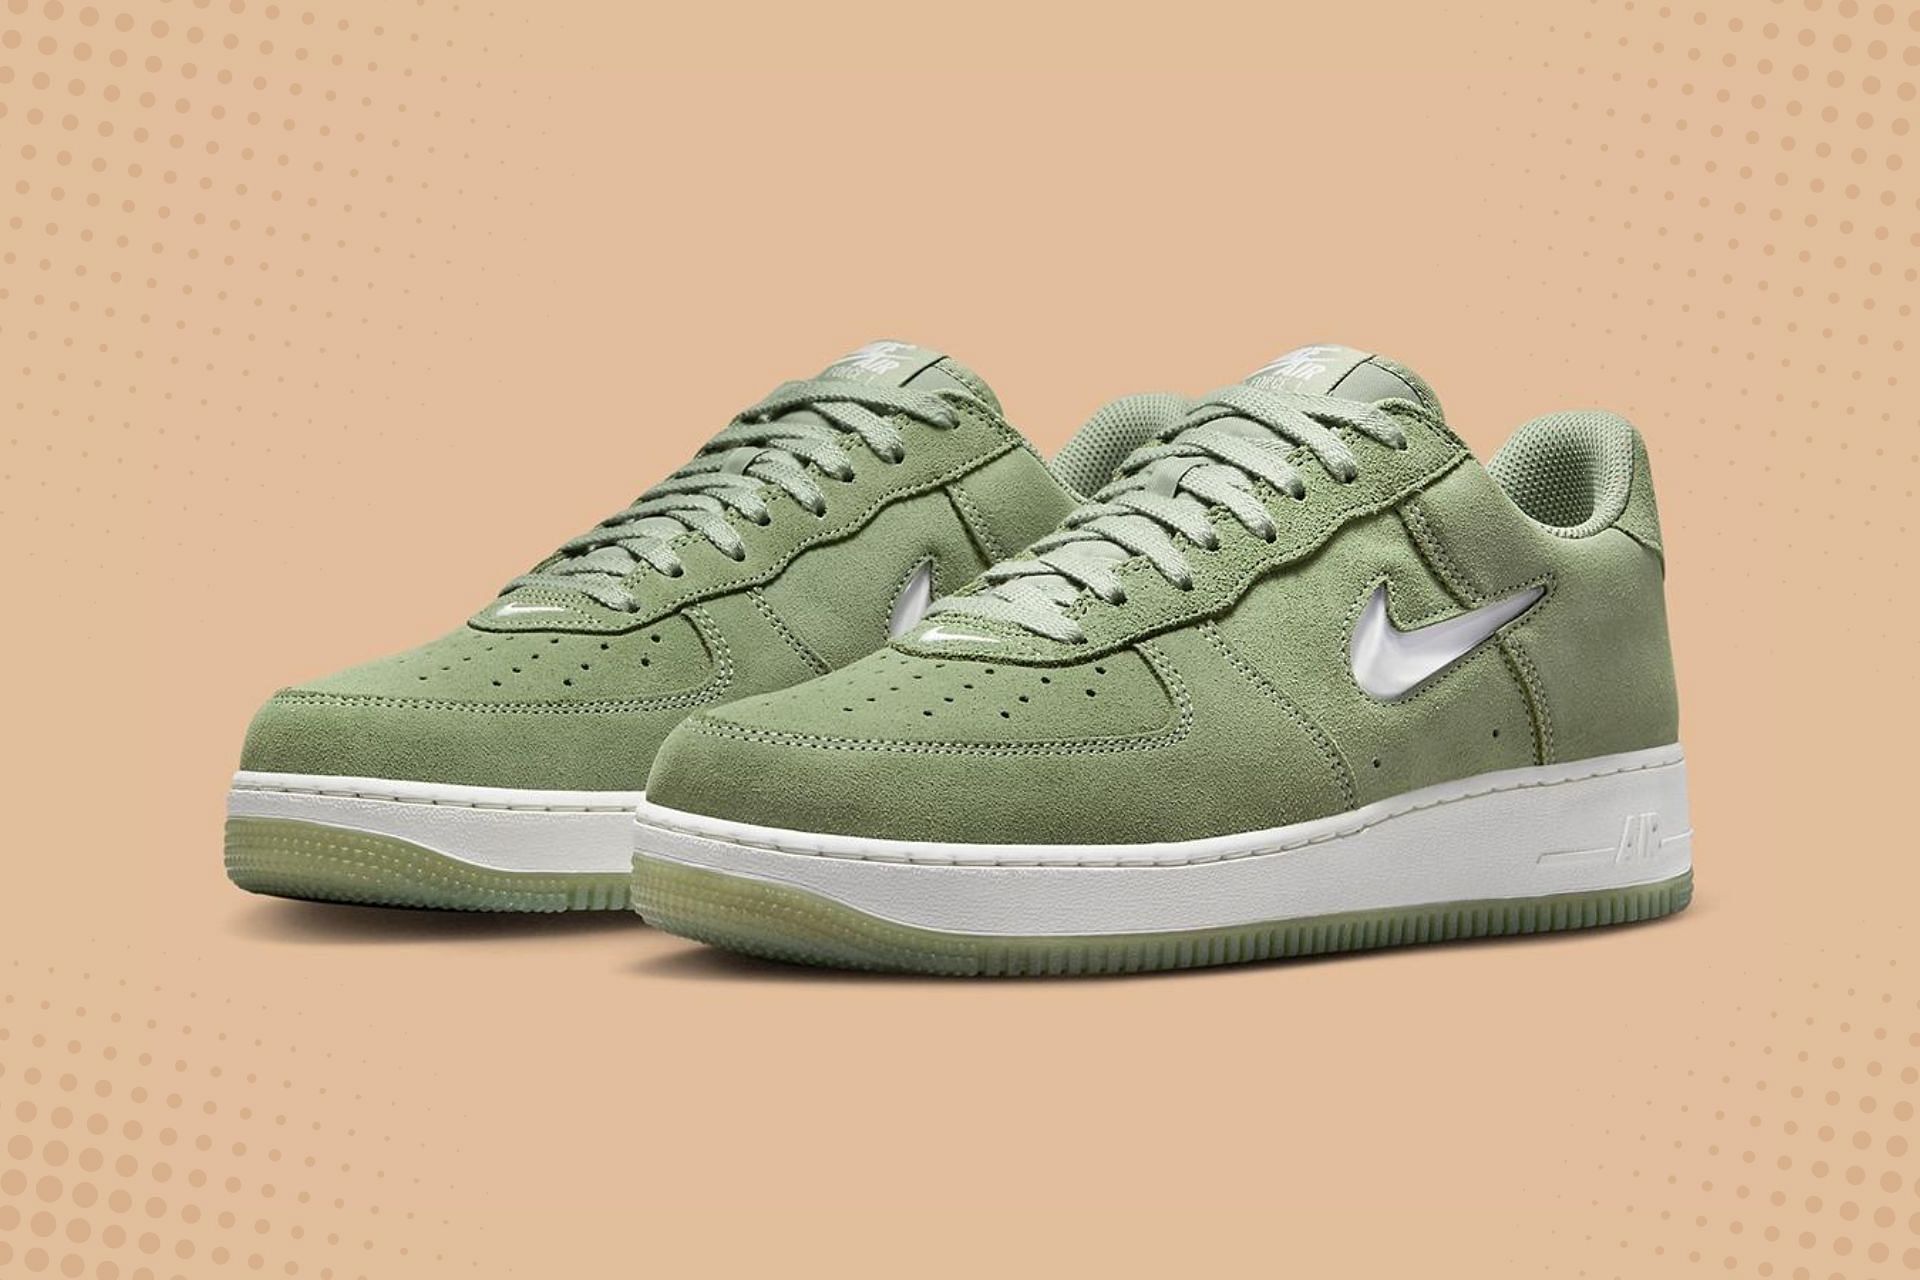 Look For These Colorways Of The Nike Air Force 1 Low Jewel Now